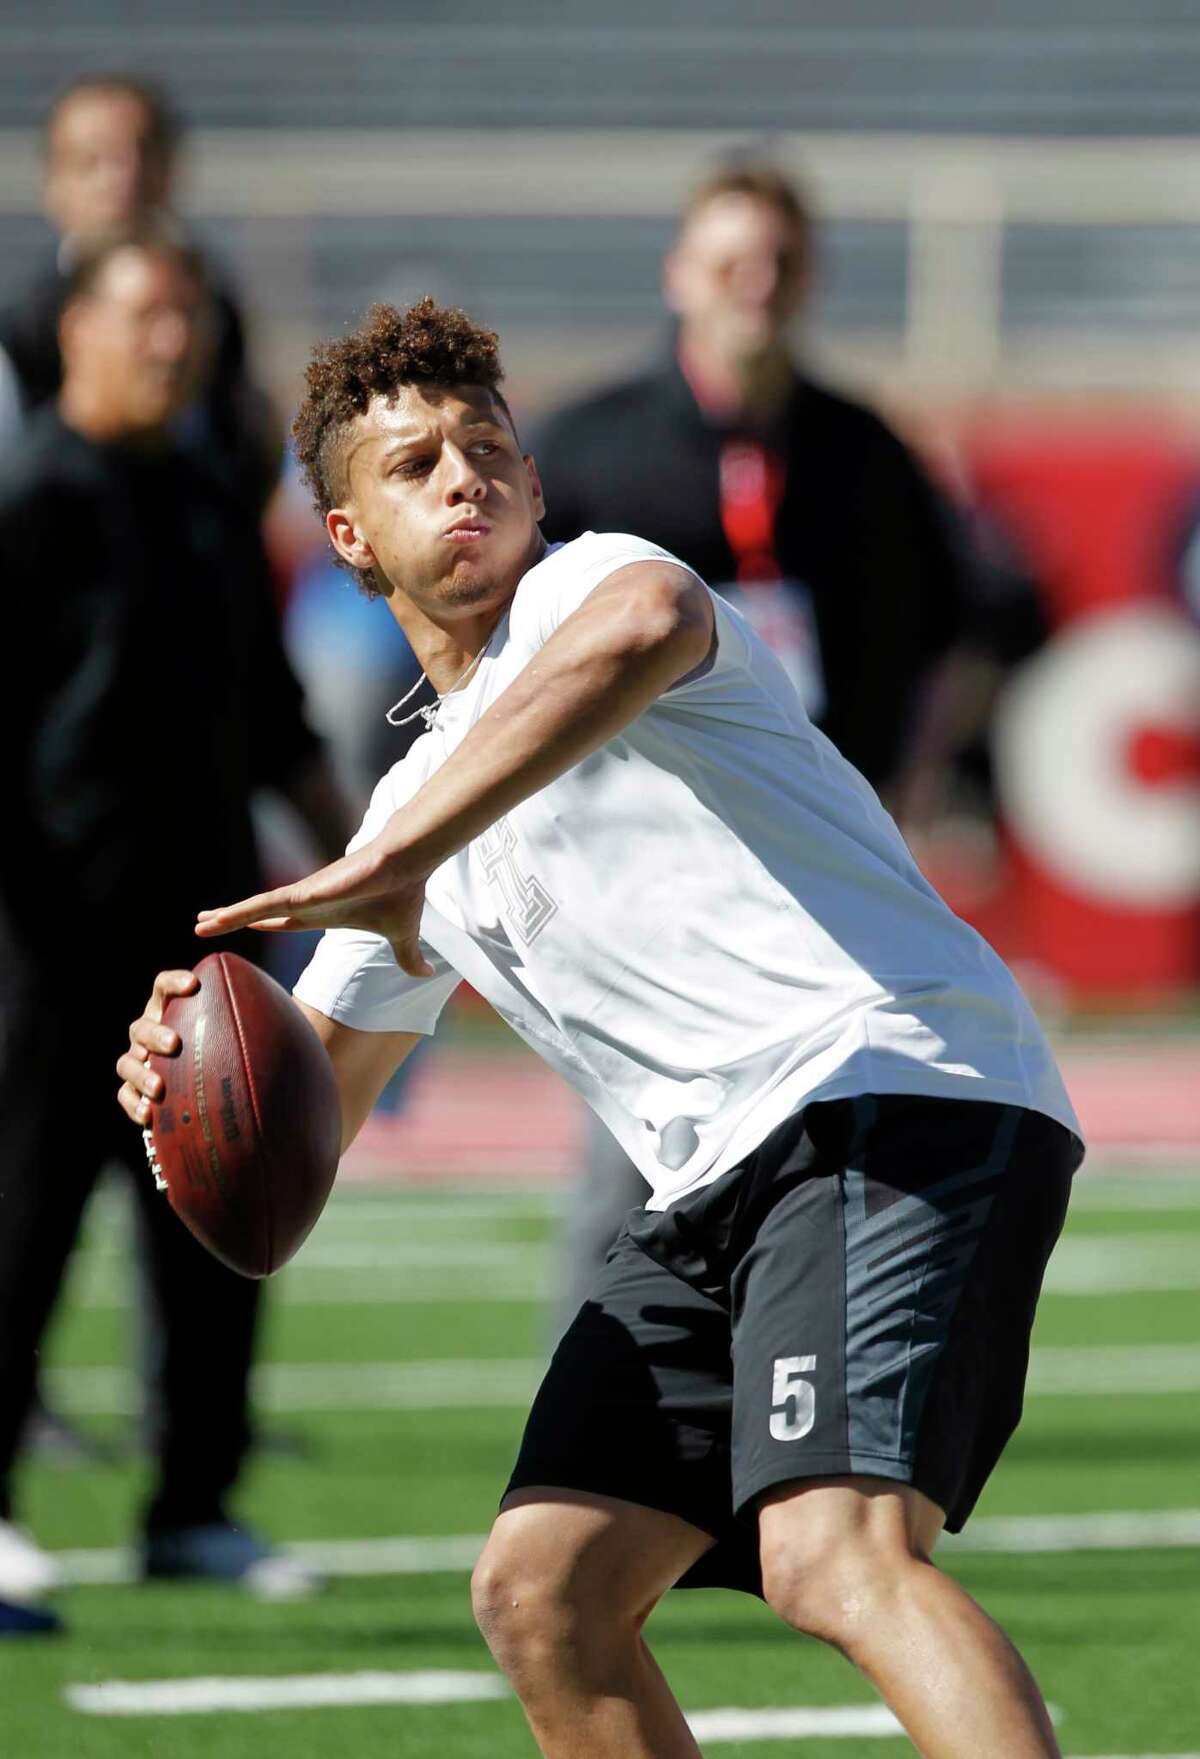 Patrick Mahomes II throws a Hail Mary pass into the north in zone during Texas Tech's pro day at Jones AT&T Stadium Friday, March 31, 2017, in Lubbock, Texas.(Mark Rogers/Lubbock Avalanche-Journal via AP)